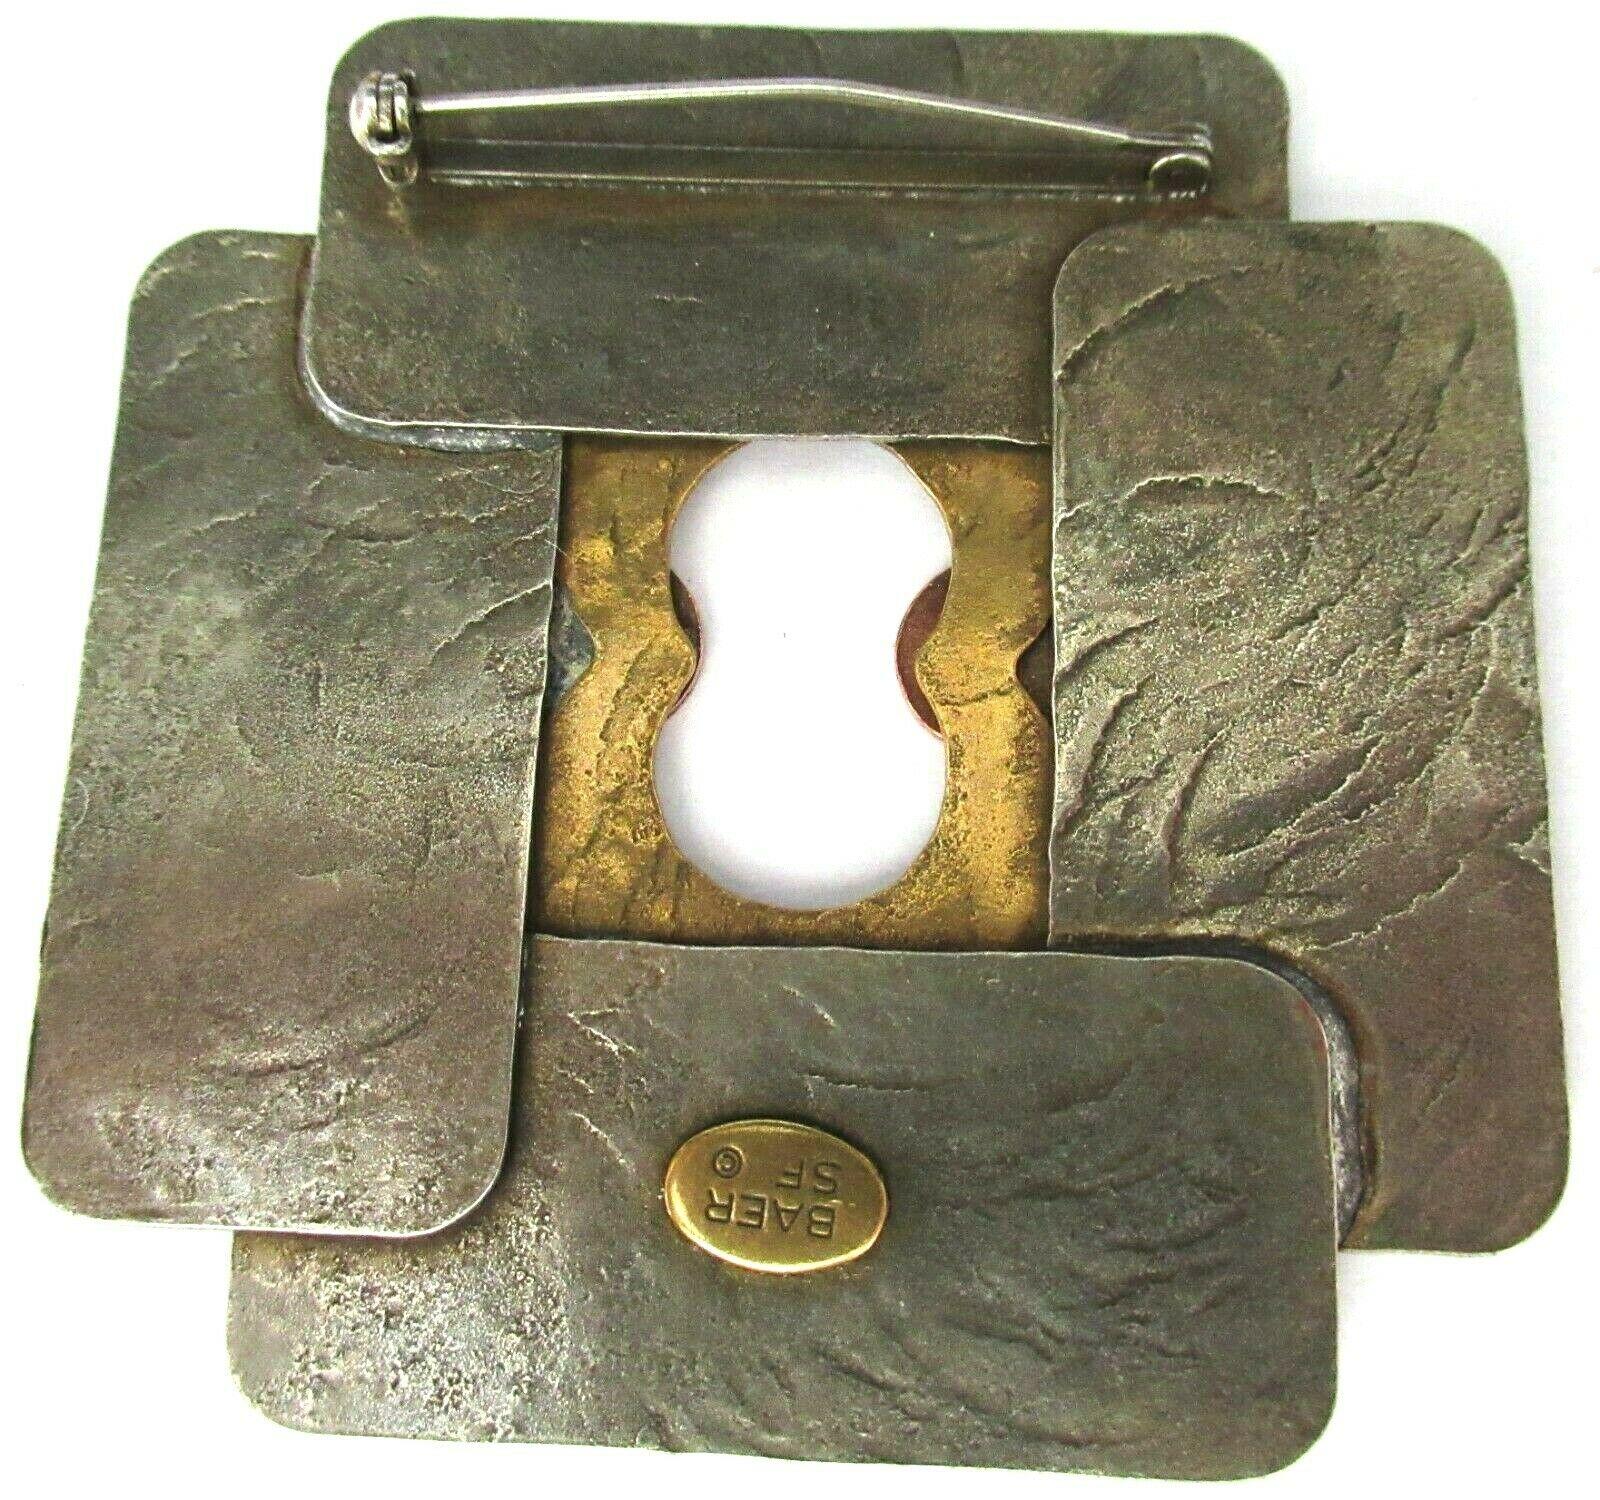 Awesome Designer Signed SF MARJORIE BAER Modernist Mixed Metals Vintage Brooch Pin. Measuring approx. 2.5